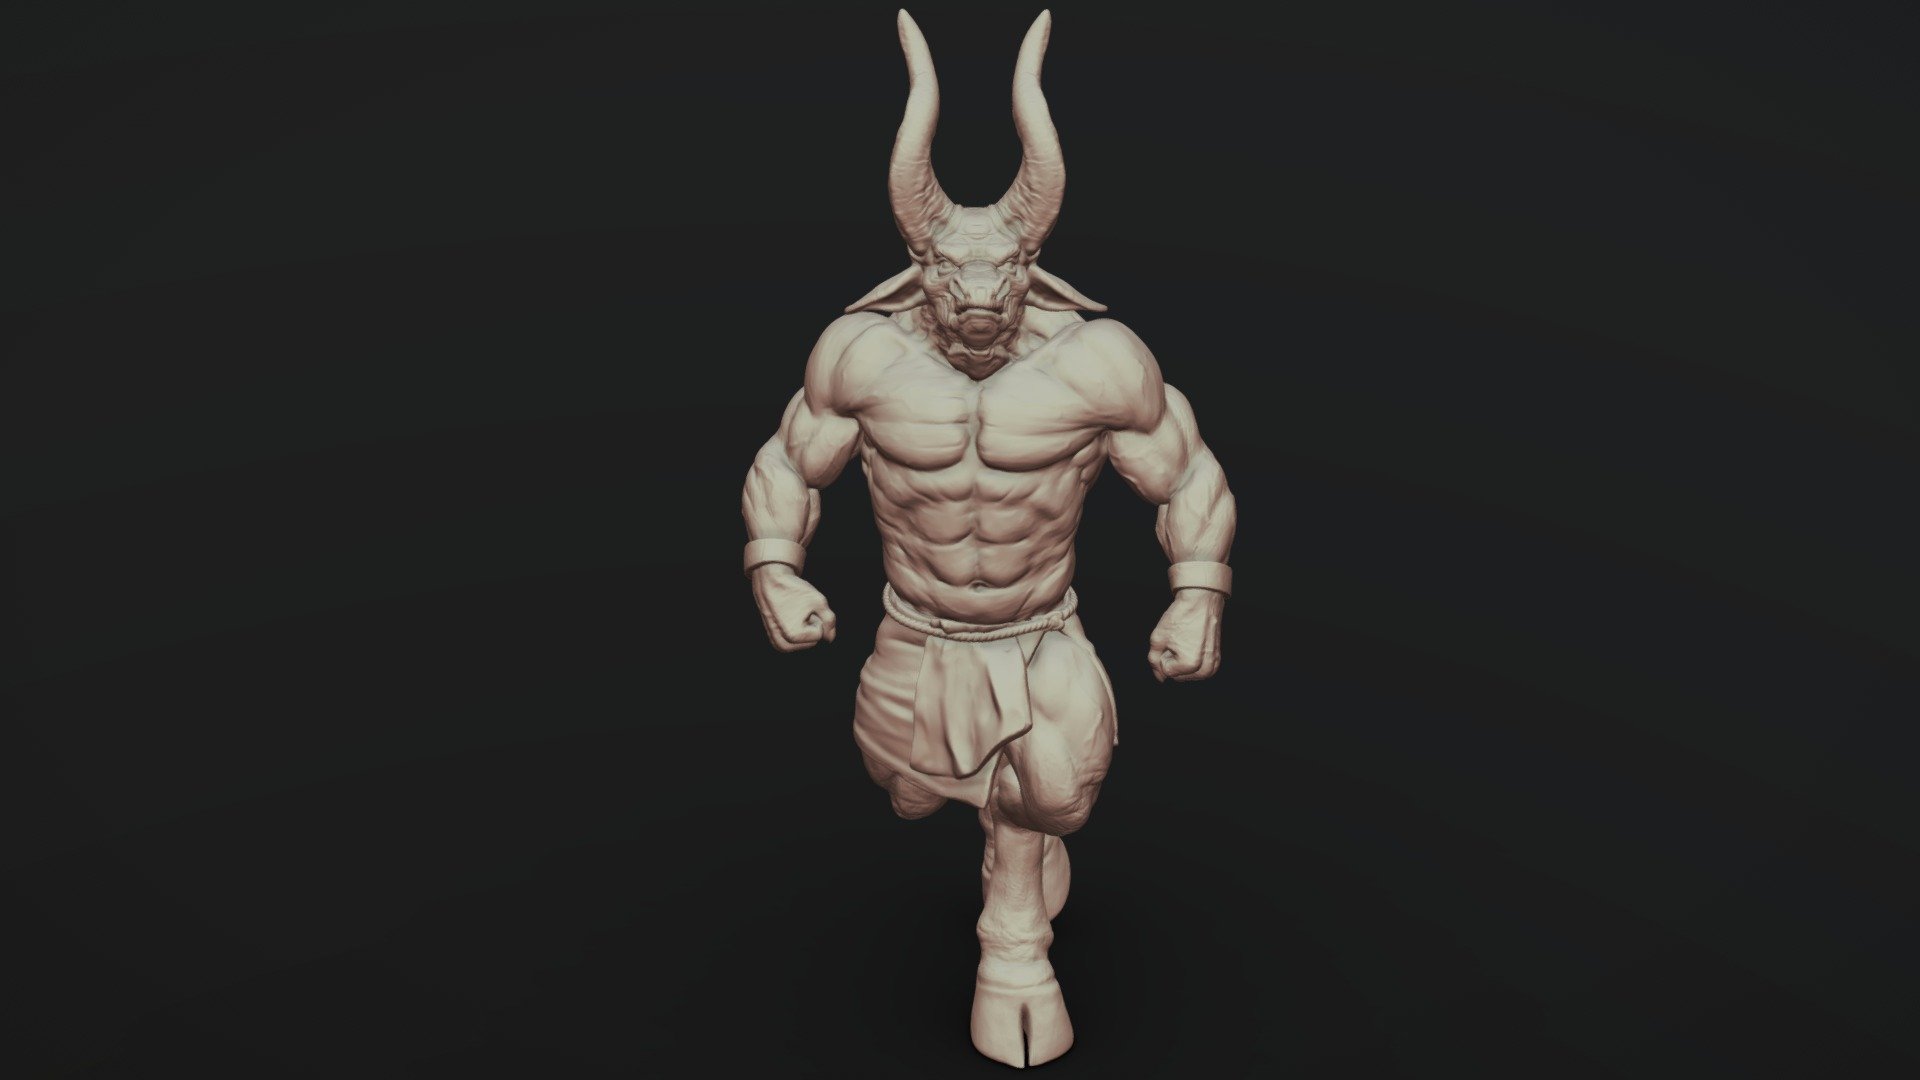 minotaur sculpt - buy royalty free 3d model rumpelstiltskin rumpelshtiltshin f94c248 created zbrush high poly mesh data only no uvs textures topology ready printing available file formats ztl 2020 above reauired obj stl hope you like check out my profile see other cool models 3D print model - Mito3D